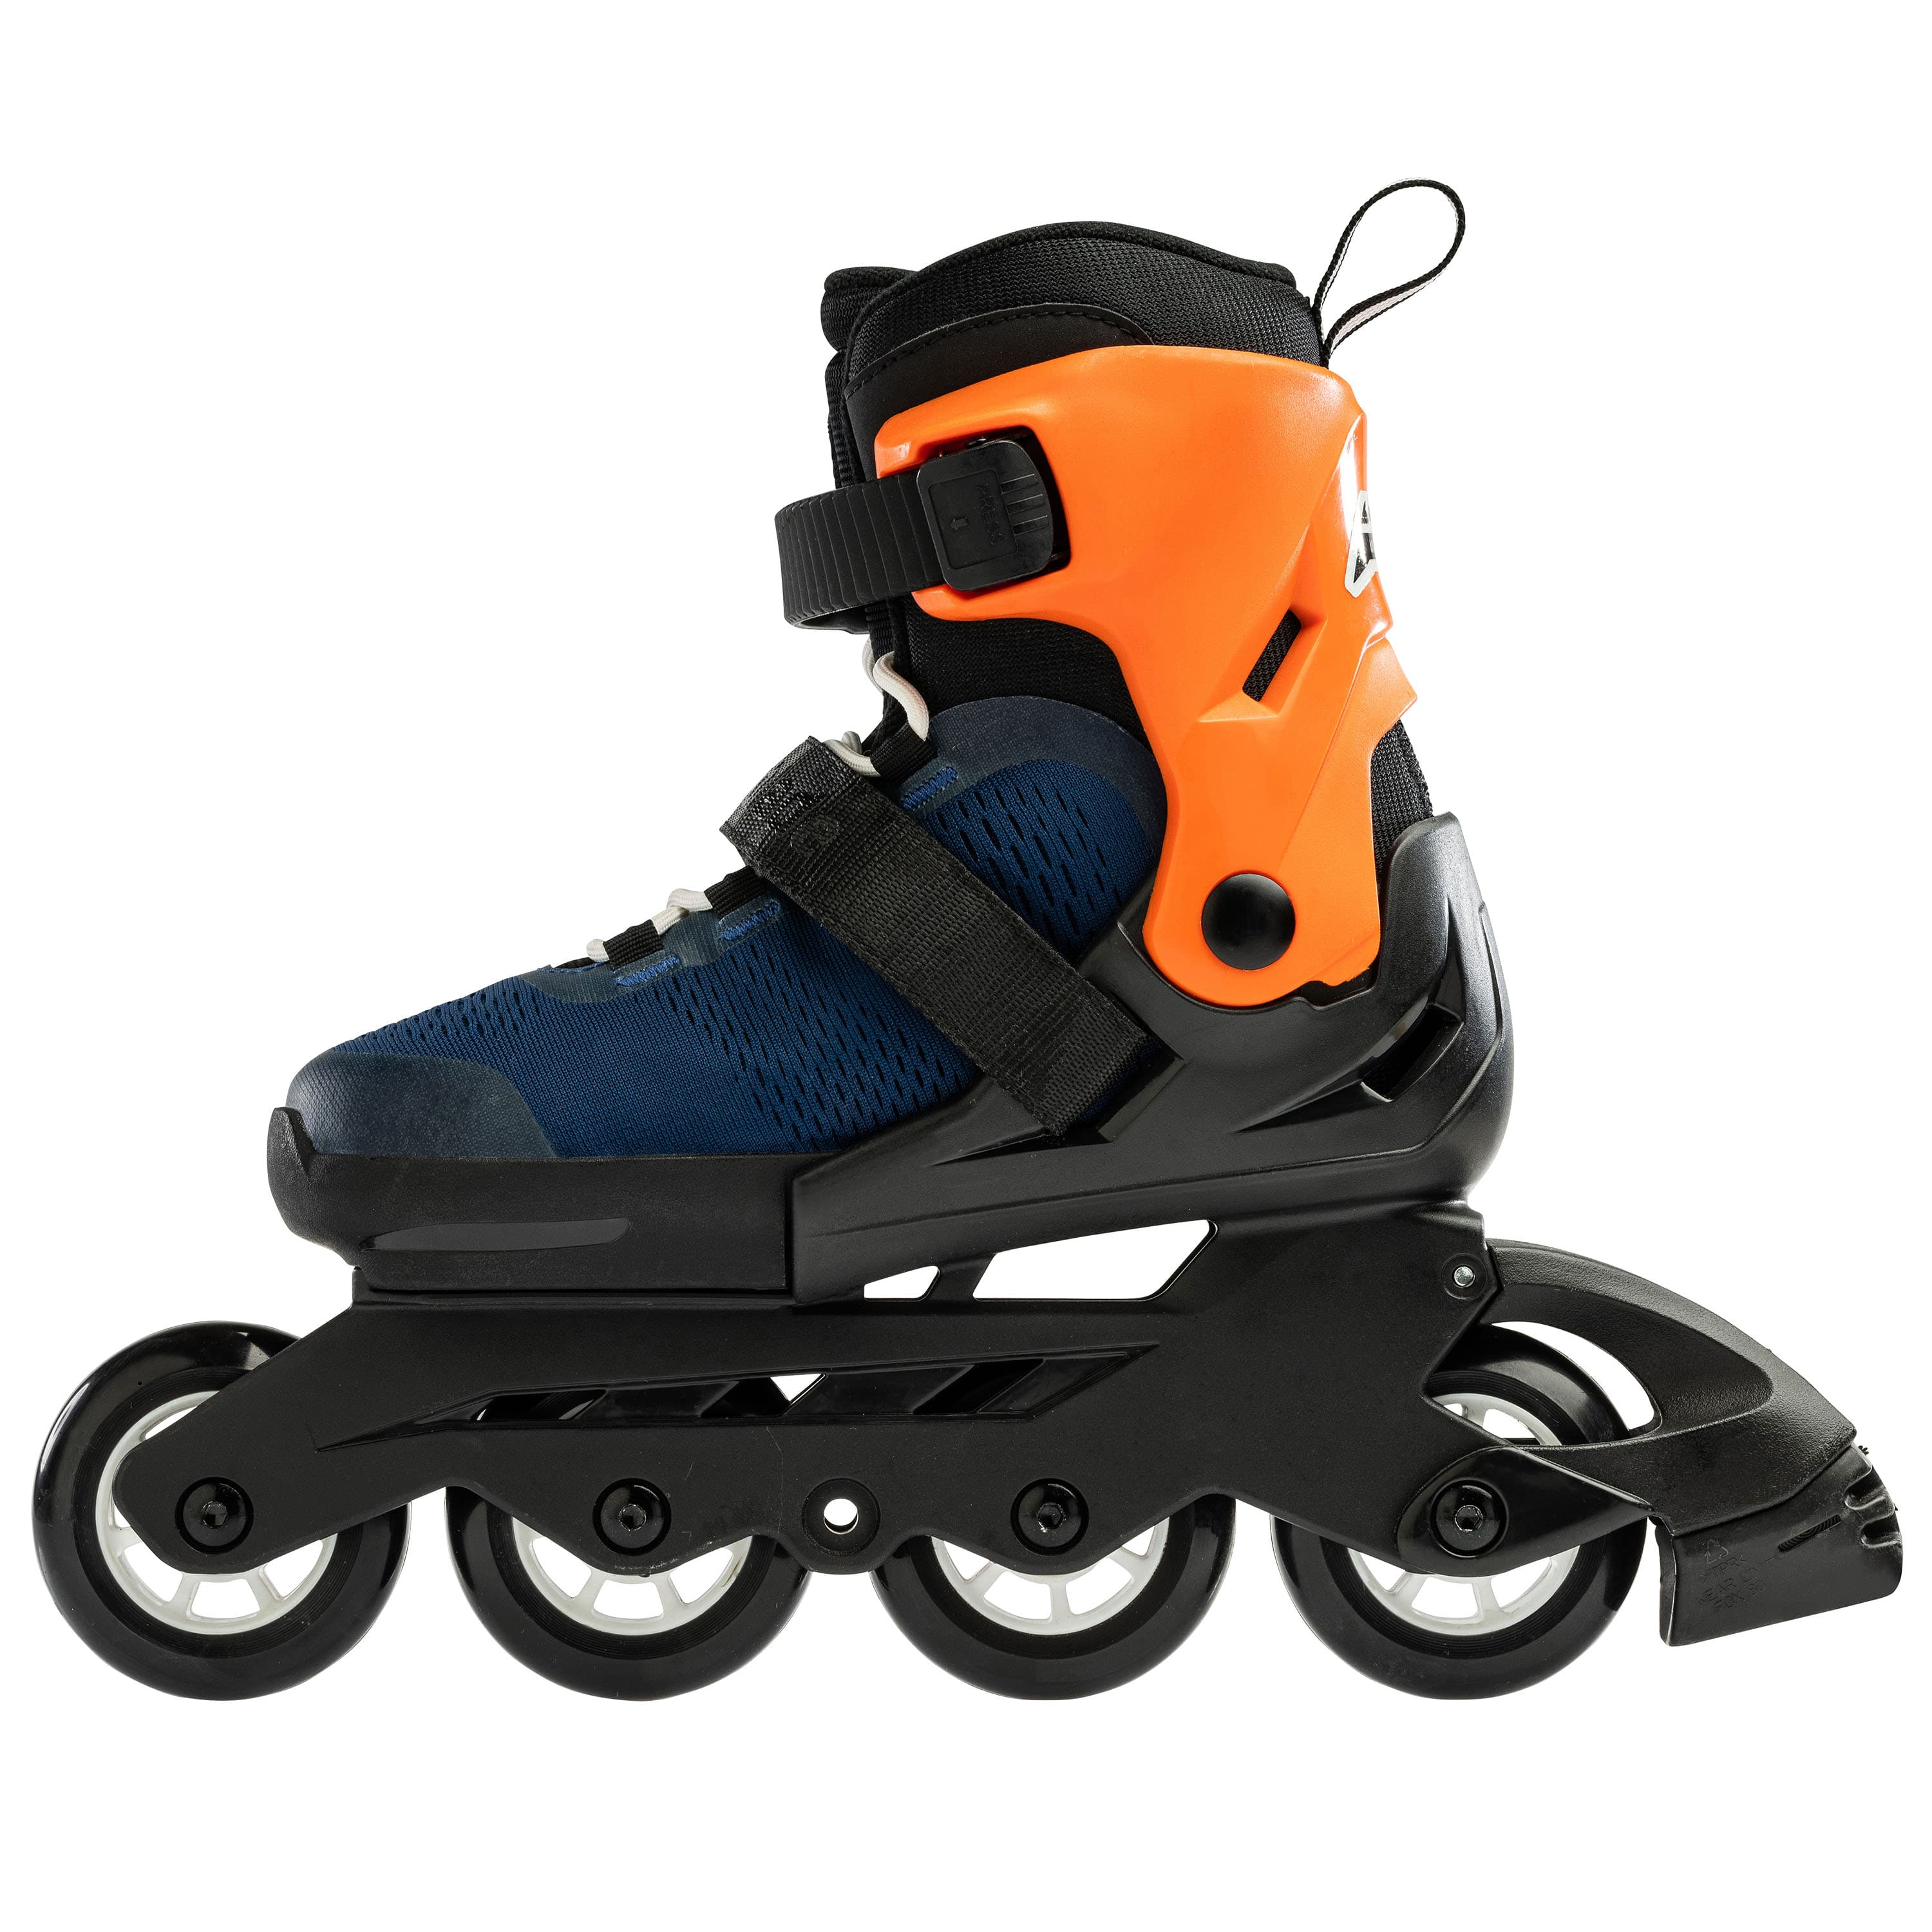 Rollerblade MICROBLADE